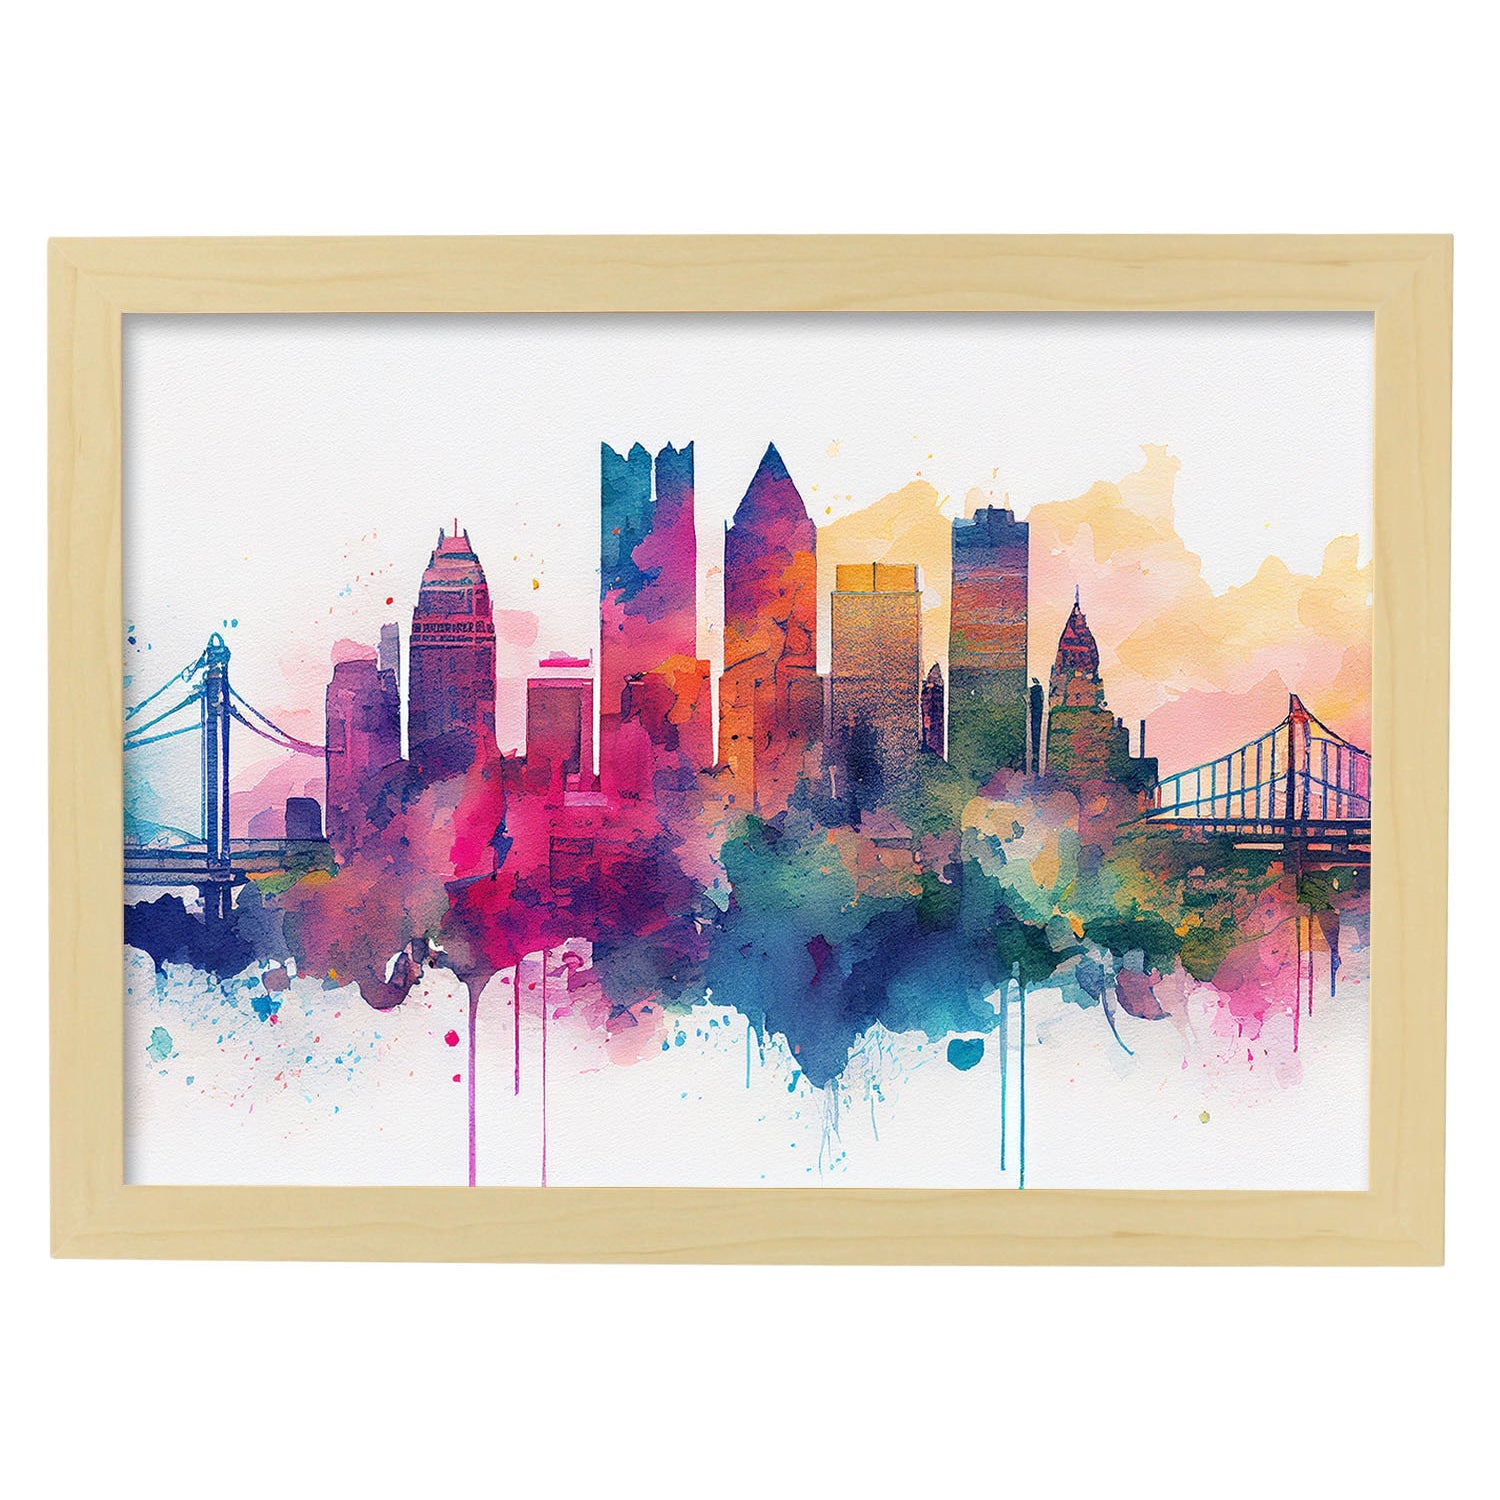 Nacnic watercolor of a skyline of the city of Pittsburgh. Aesthetic Wall Art Prints for Bedroom or Living Room Design.-Artwork-Nacnic-A4-Marco Madera Clara-Nacnic Estudio SL